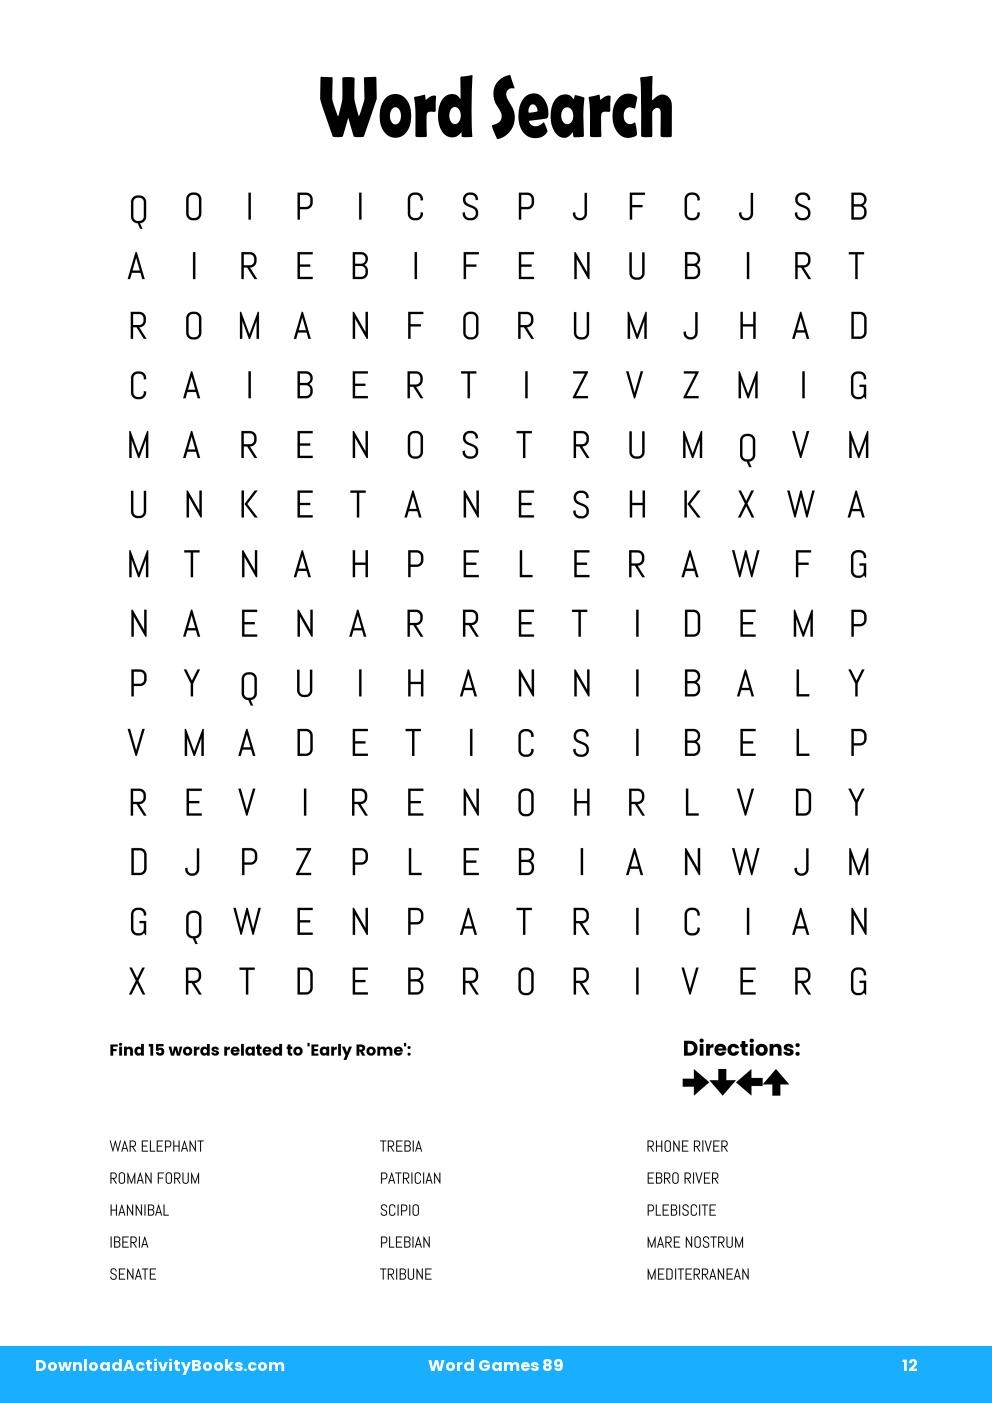 Word Search in Word Games 89